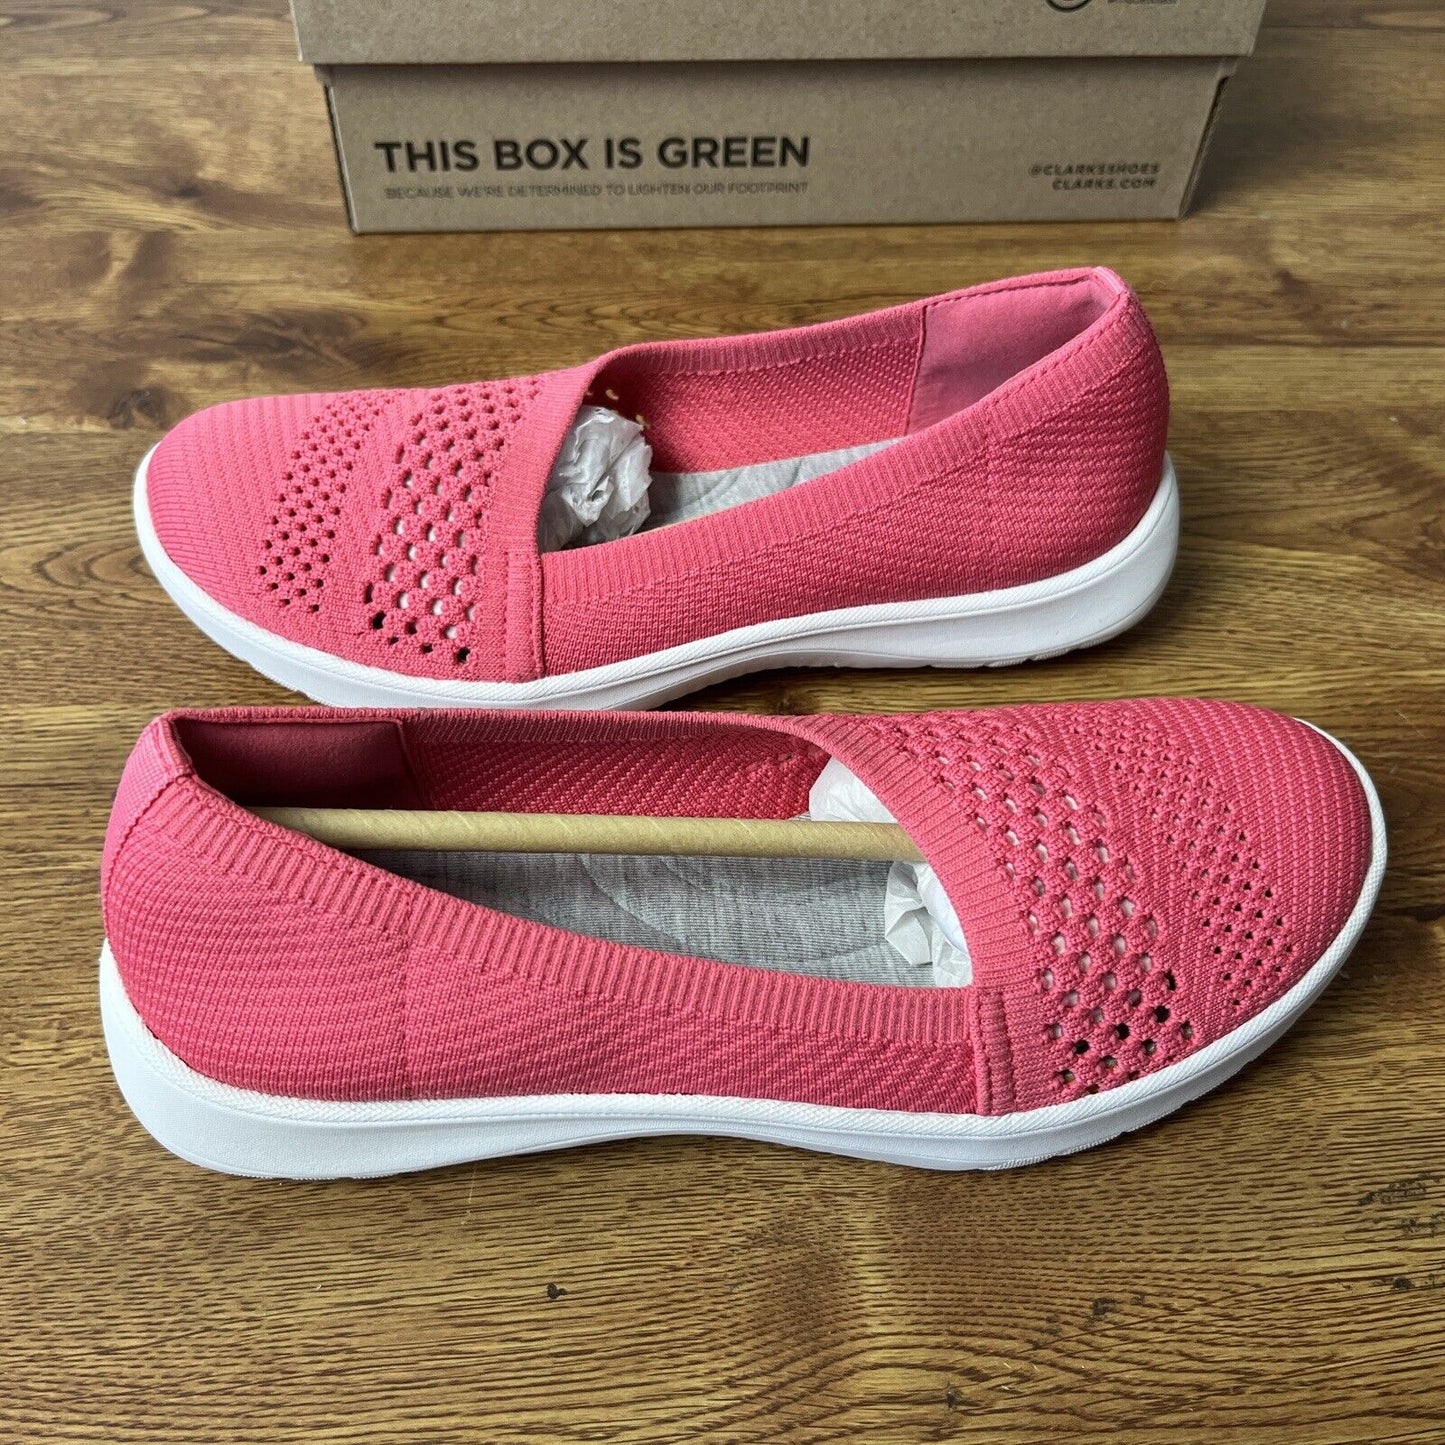 Clarks Cloudsteppers Washable Knit Slip-Ons - Adella Moon-Coral Womens 6.5 M NEW